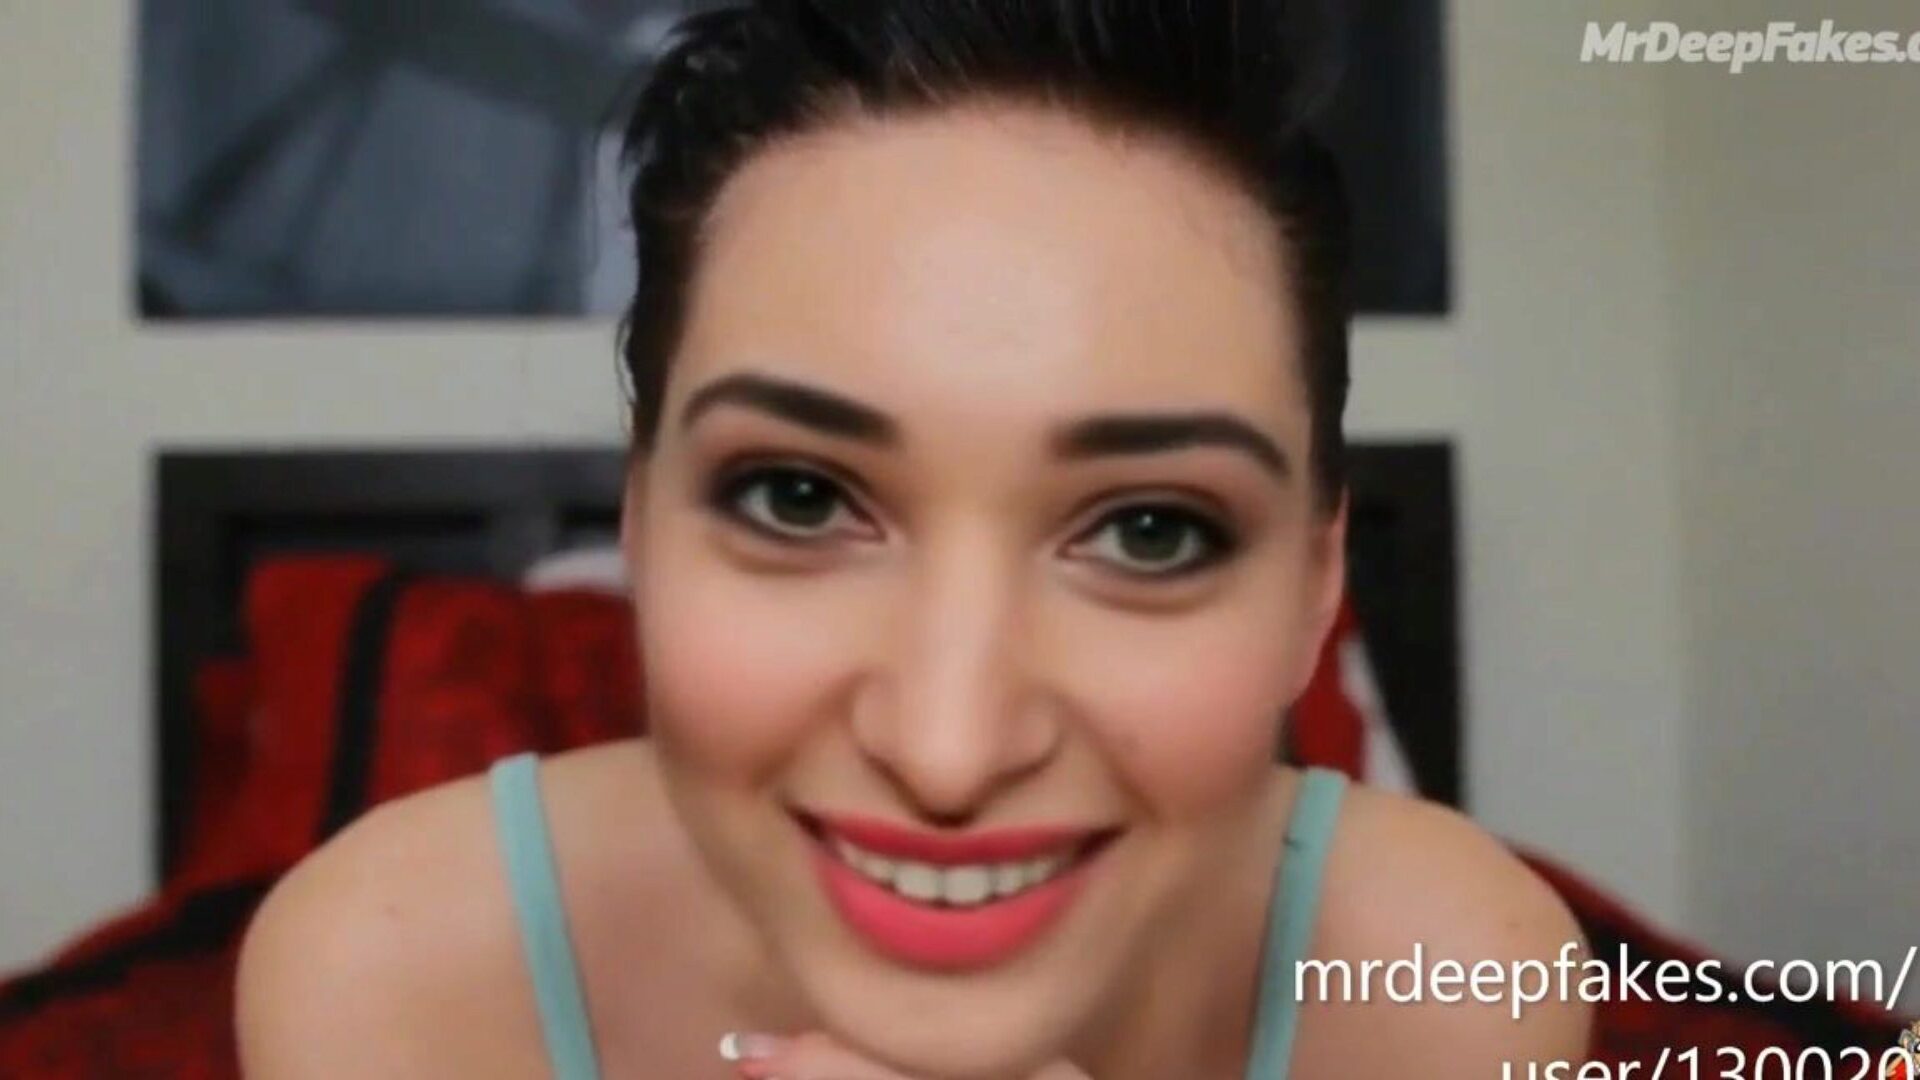 Tamannaah Hardcore Sex, Free Indian Porn Video aa: xHamster | xHamster Watch Tamannaah Hardcore Sex episode on xHamster, the most excellent HD fuck-a-thon tube website with tons of free-for-all Indian New Sex & Creampie porno movie scenes